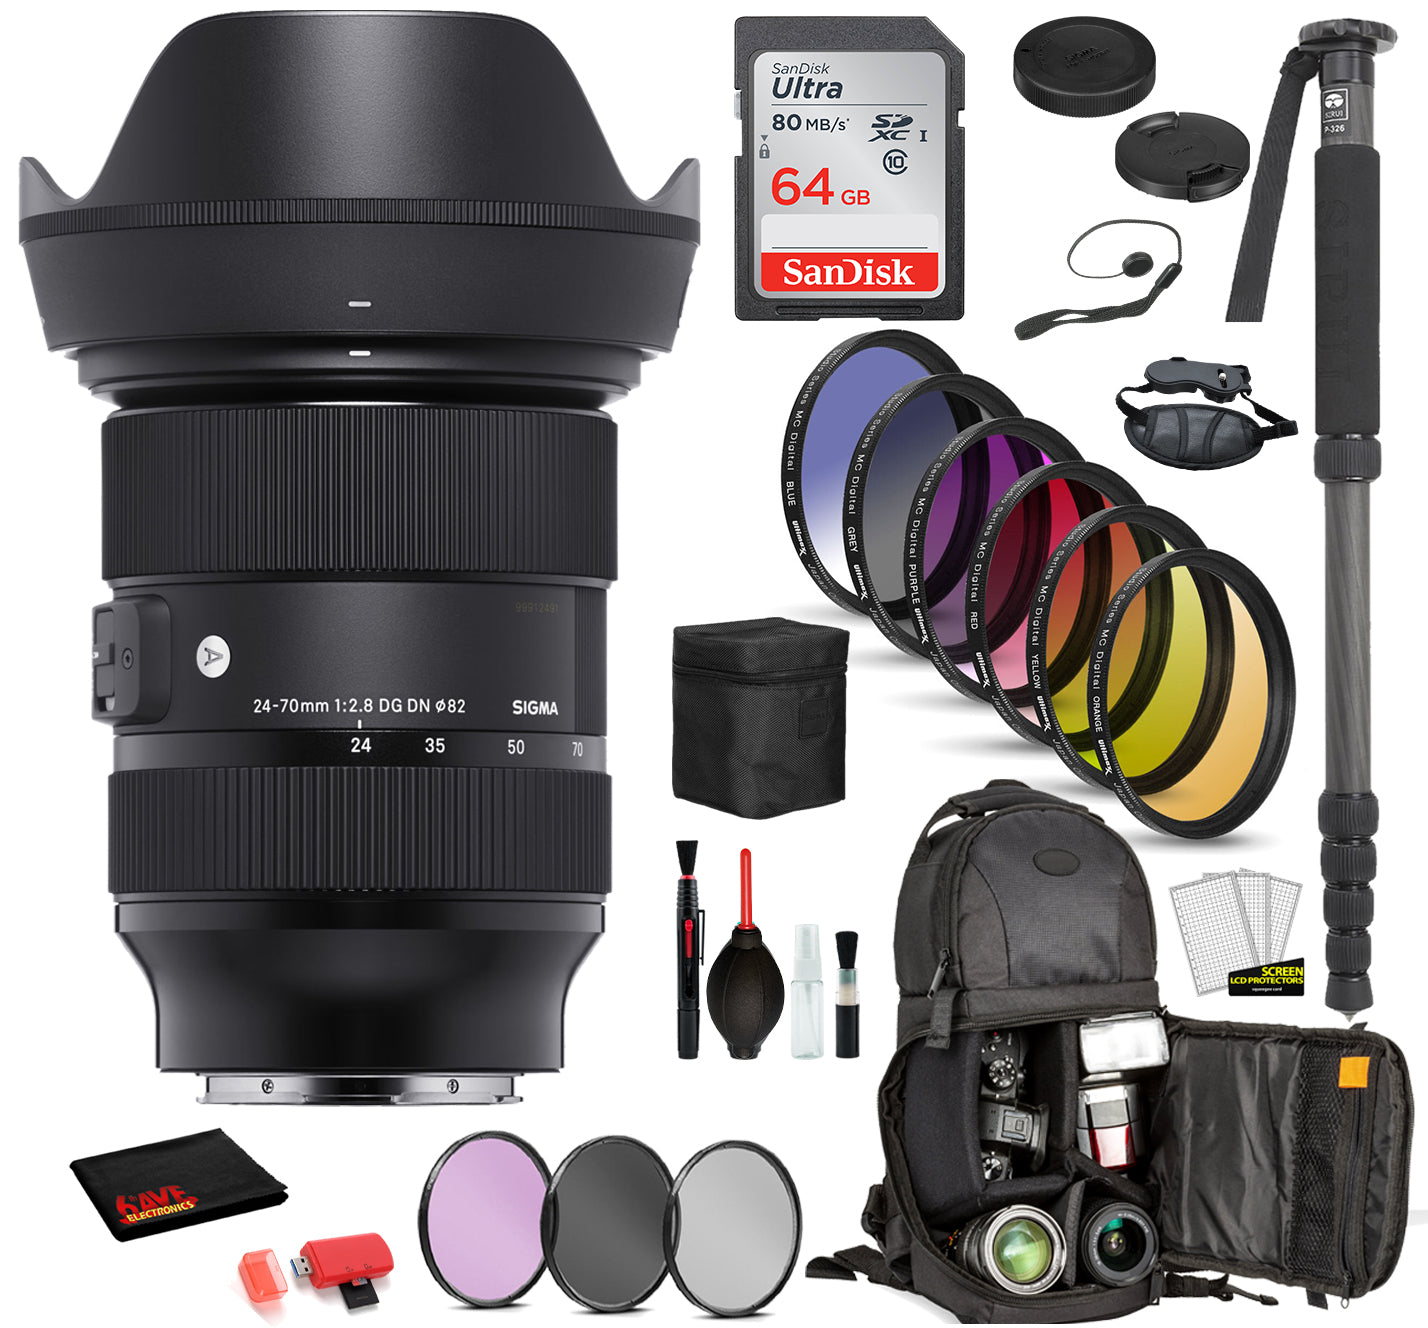 Sigma 24-70mm f/2.8 DG DN Art Lens for Sony E Mount with: Sandisk 64gb SD Card, 9PC Filter Kit + More